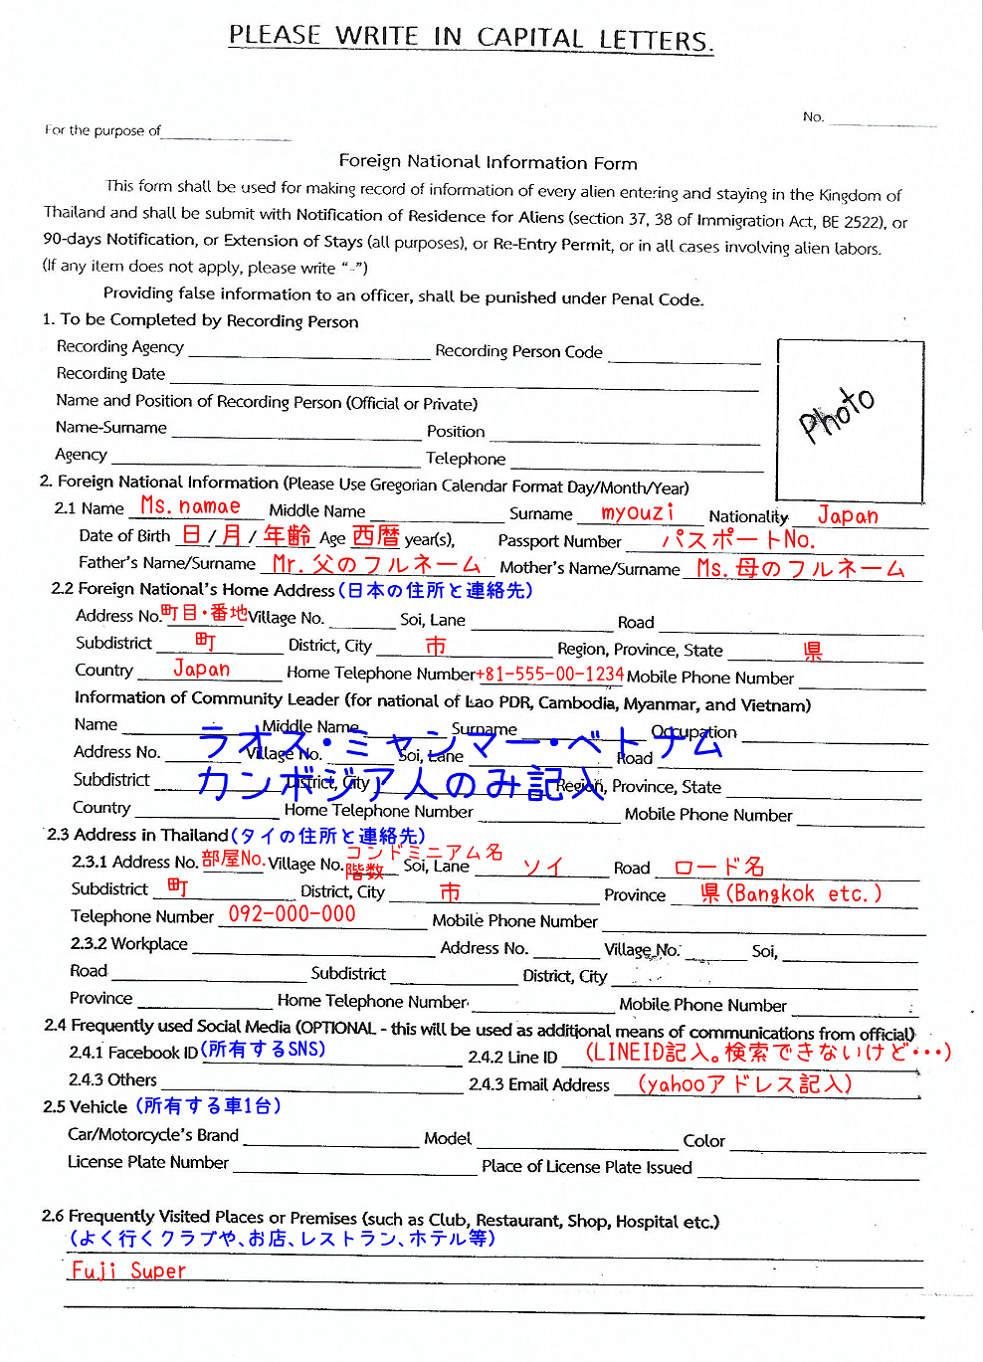  foreign National Information Form 